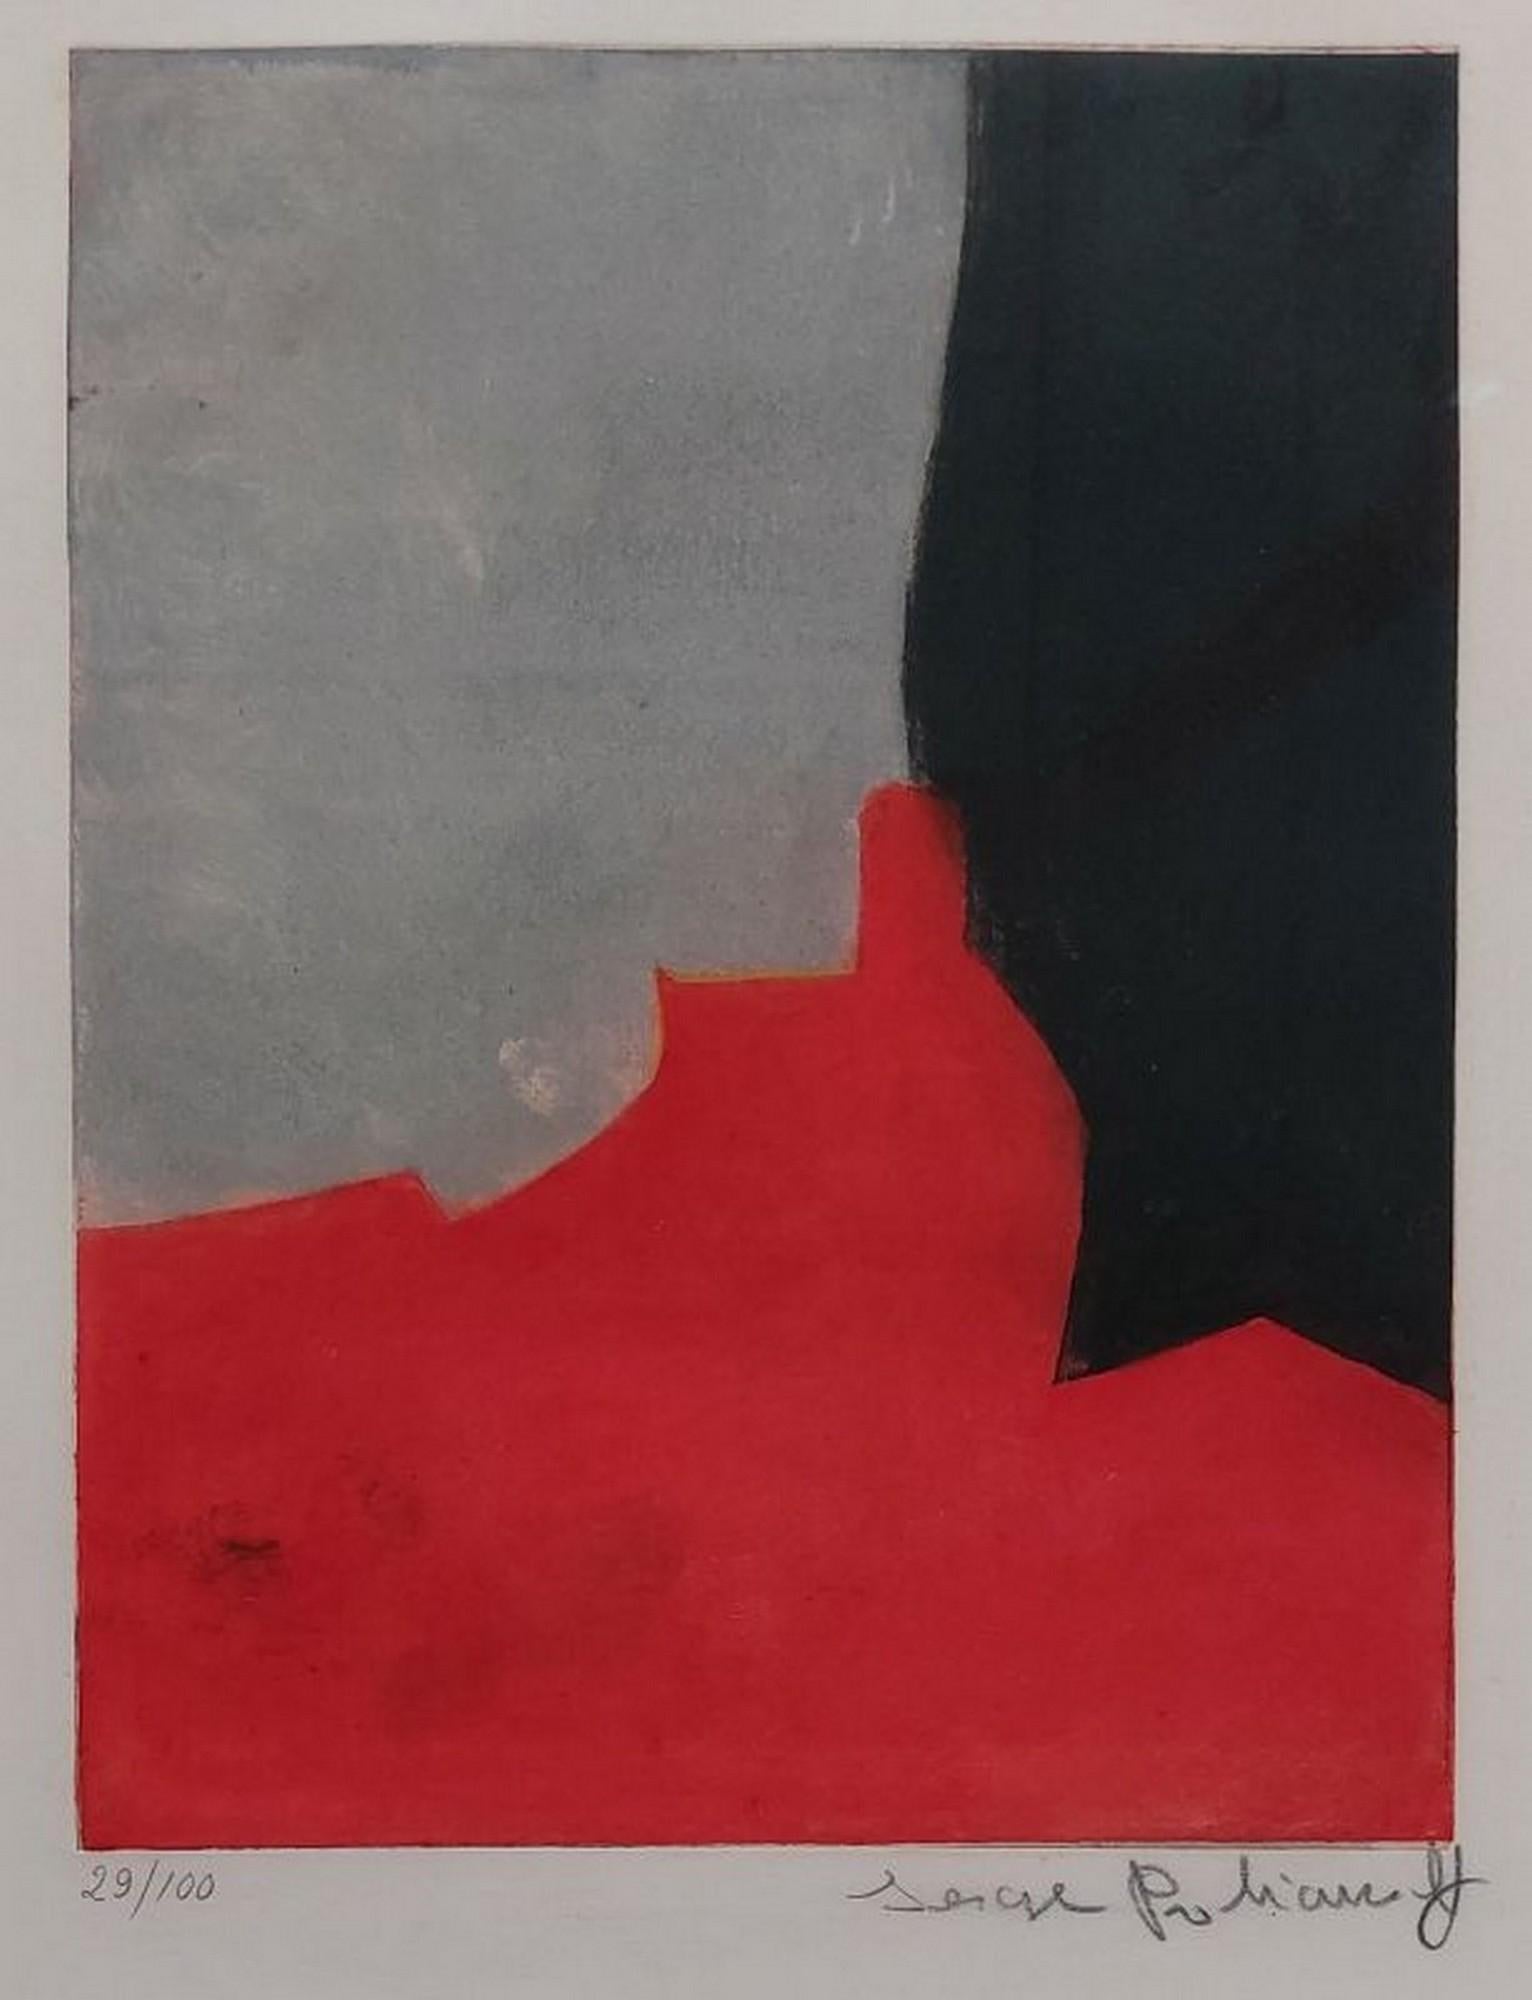 Serge Poliakoff Abstract Print - Red, grey and black composition IV 